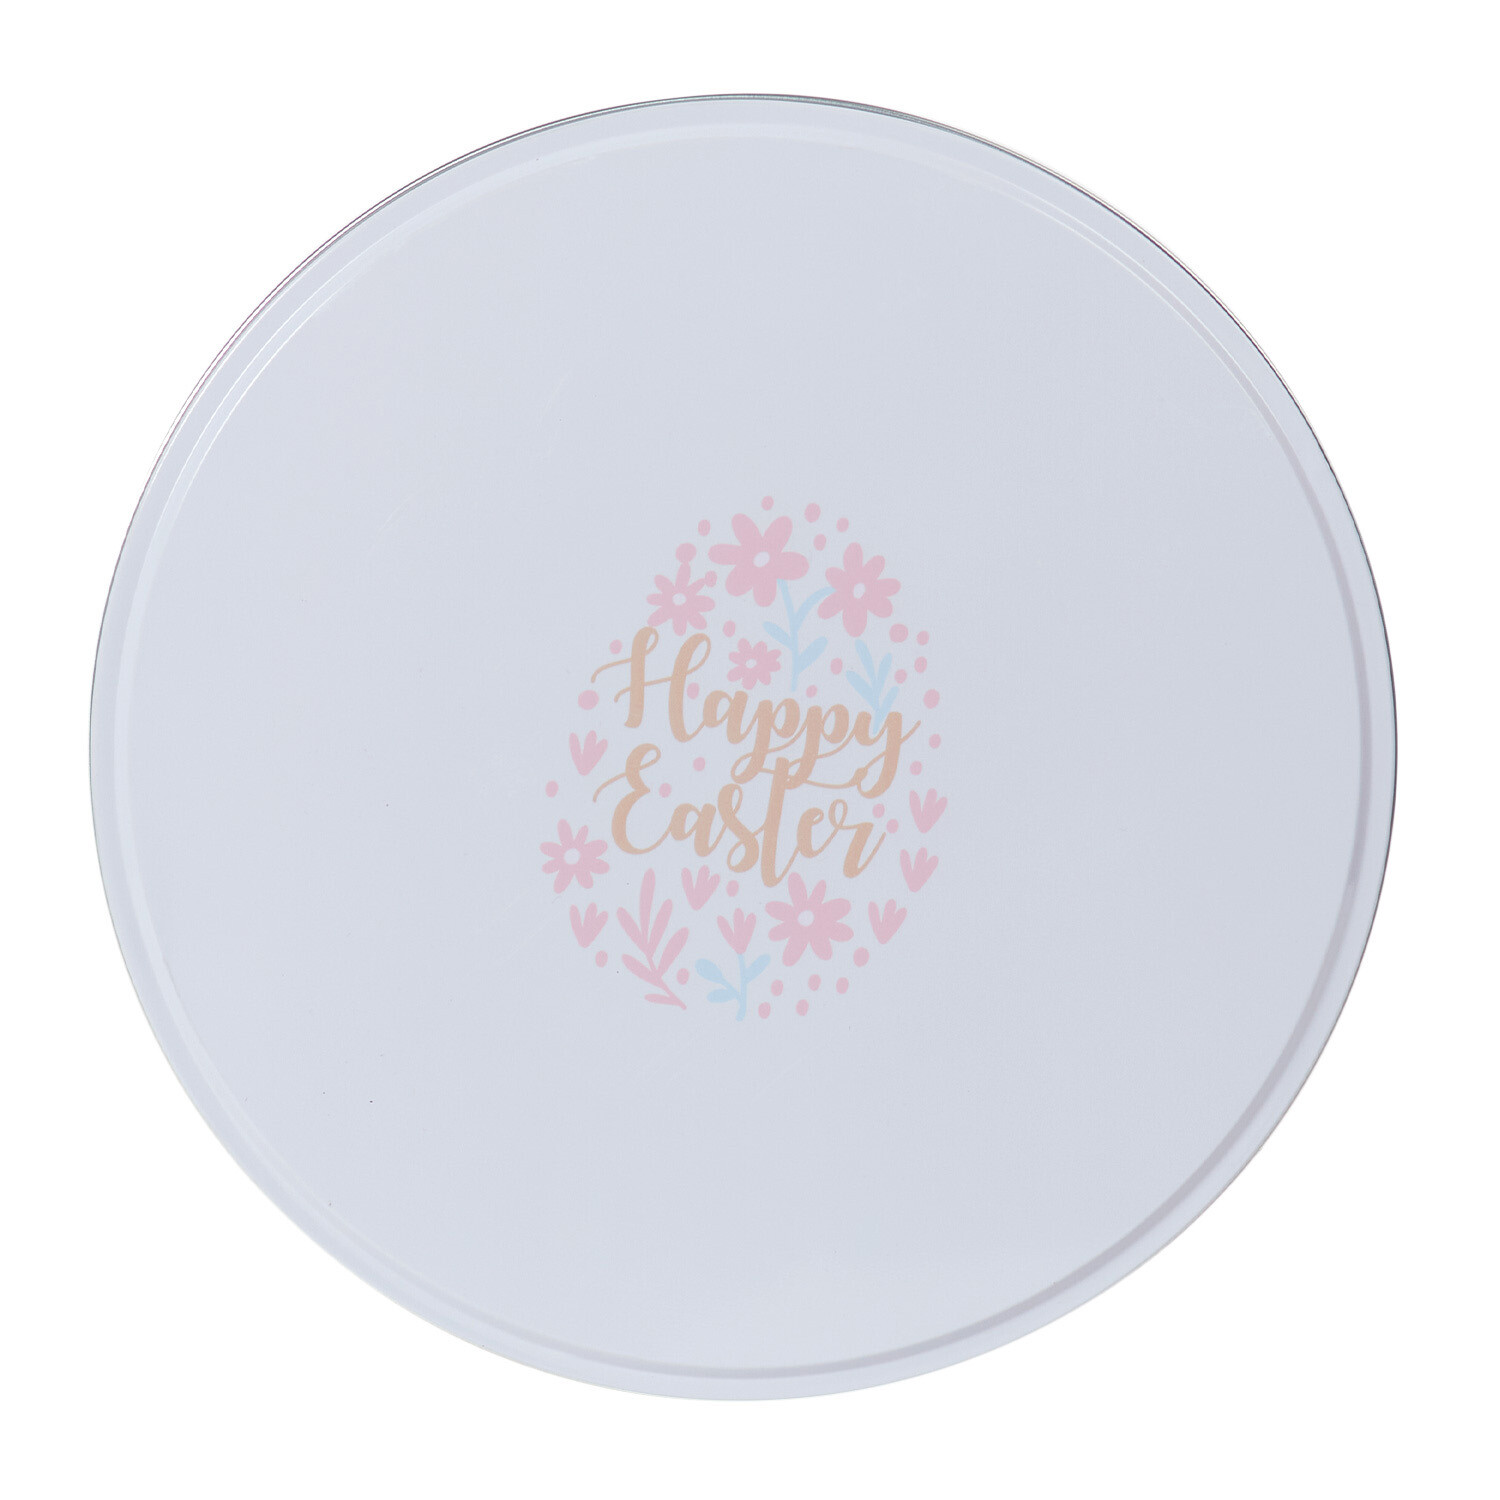 Pack of 3 Happy Easter Cake Tins - White Image 1